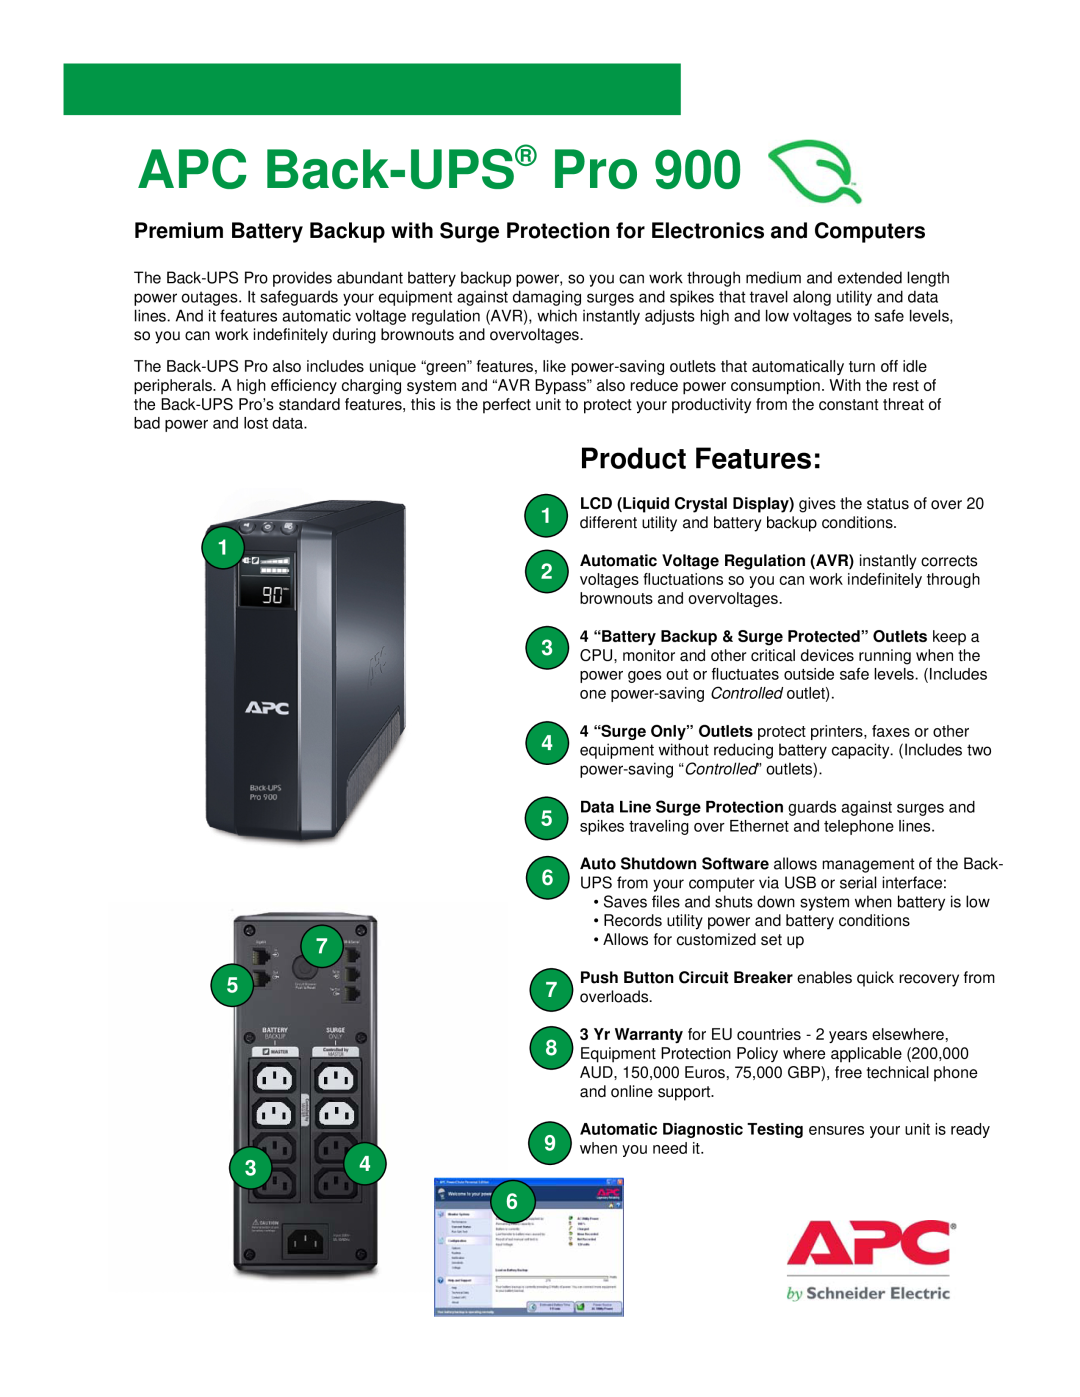 APC PRO 900 warranty LCD Liquid Crystal Display gives the status of over, APC Back-UPS Pro, Product Features 